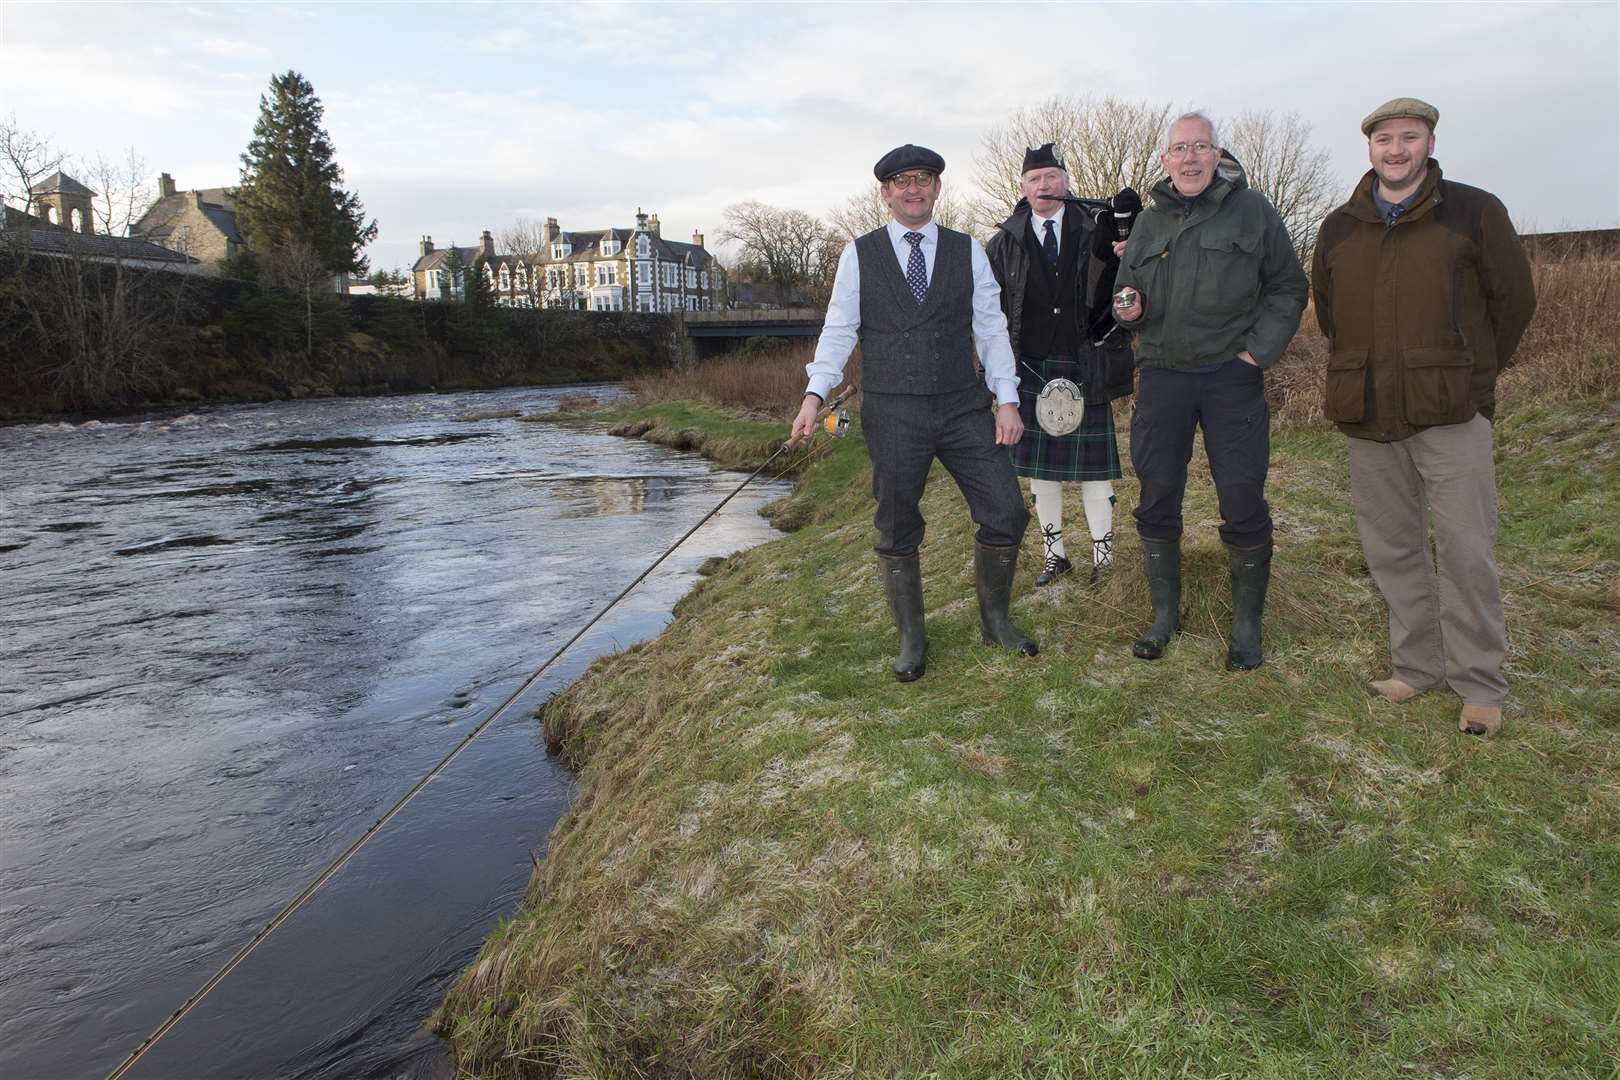 Piper Alasdair Miller with (from left) Richard Medley, who cast the first fly, Alan Youngson, who toasted the river, and senior ghillie Geordie Doull at the opening of the salmon season on Thurso River. Picture: Robert MacDonald / Northern Studios